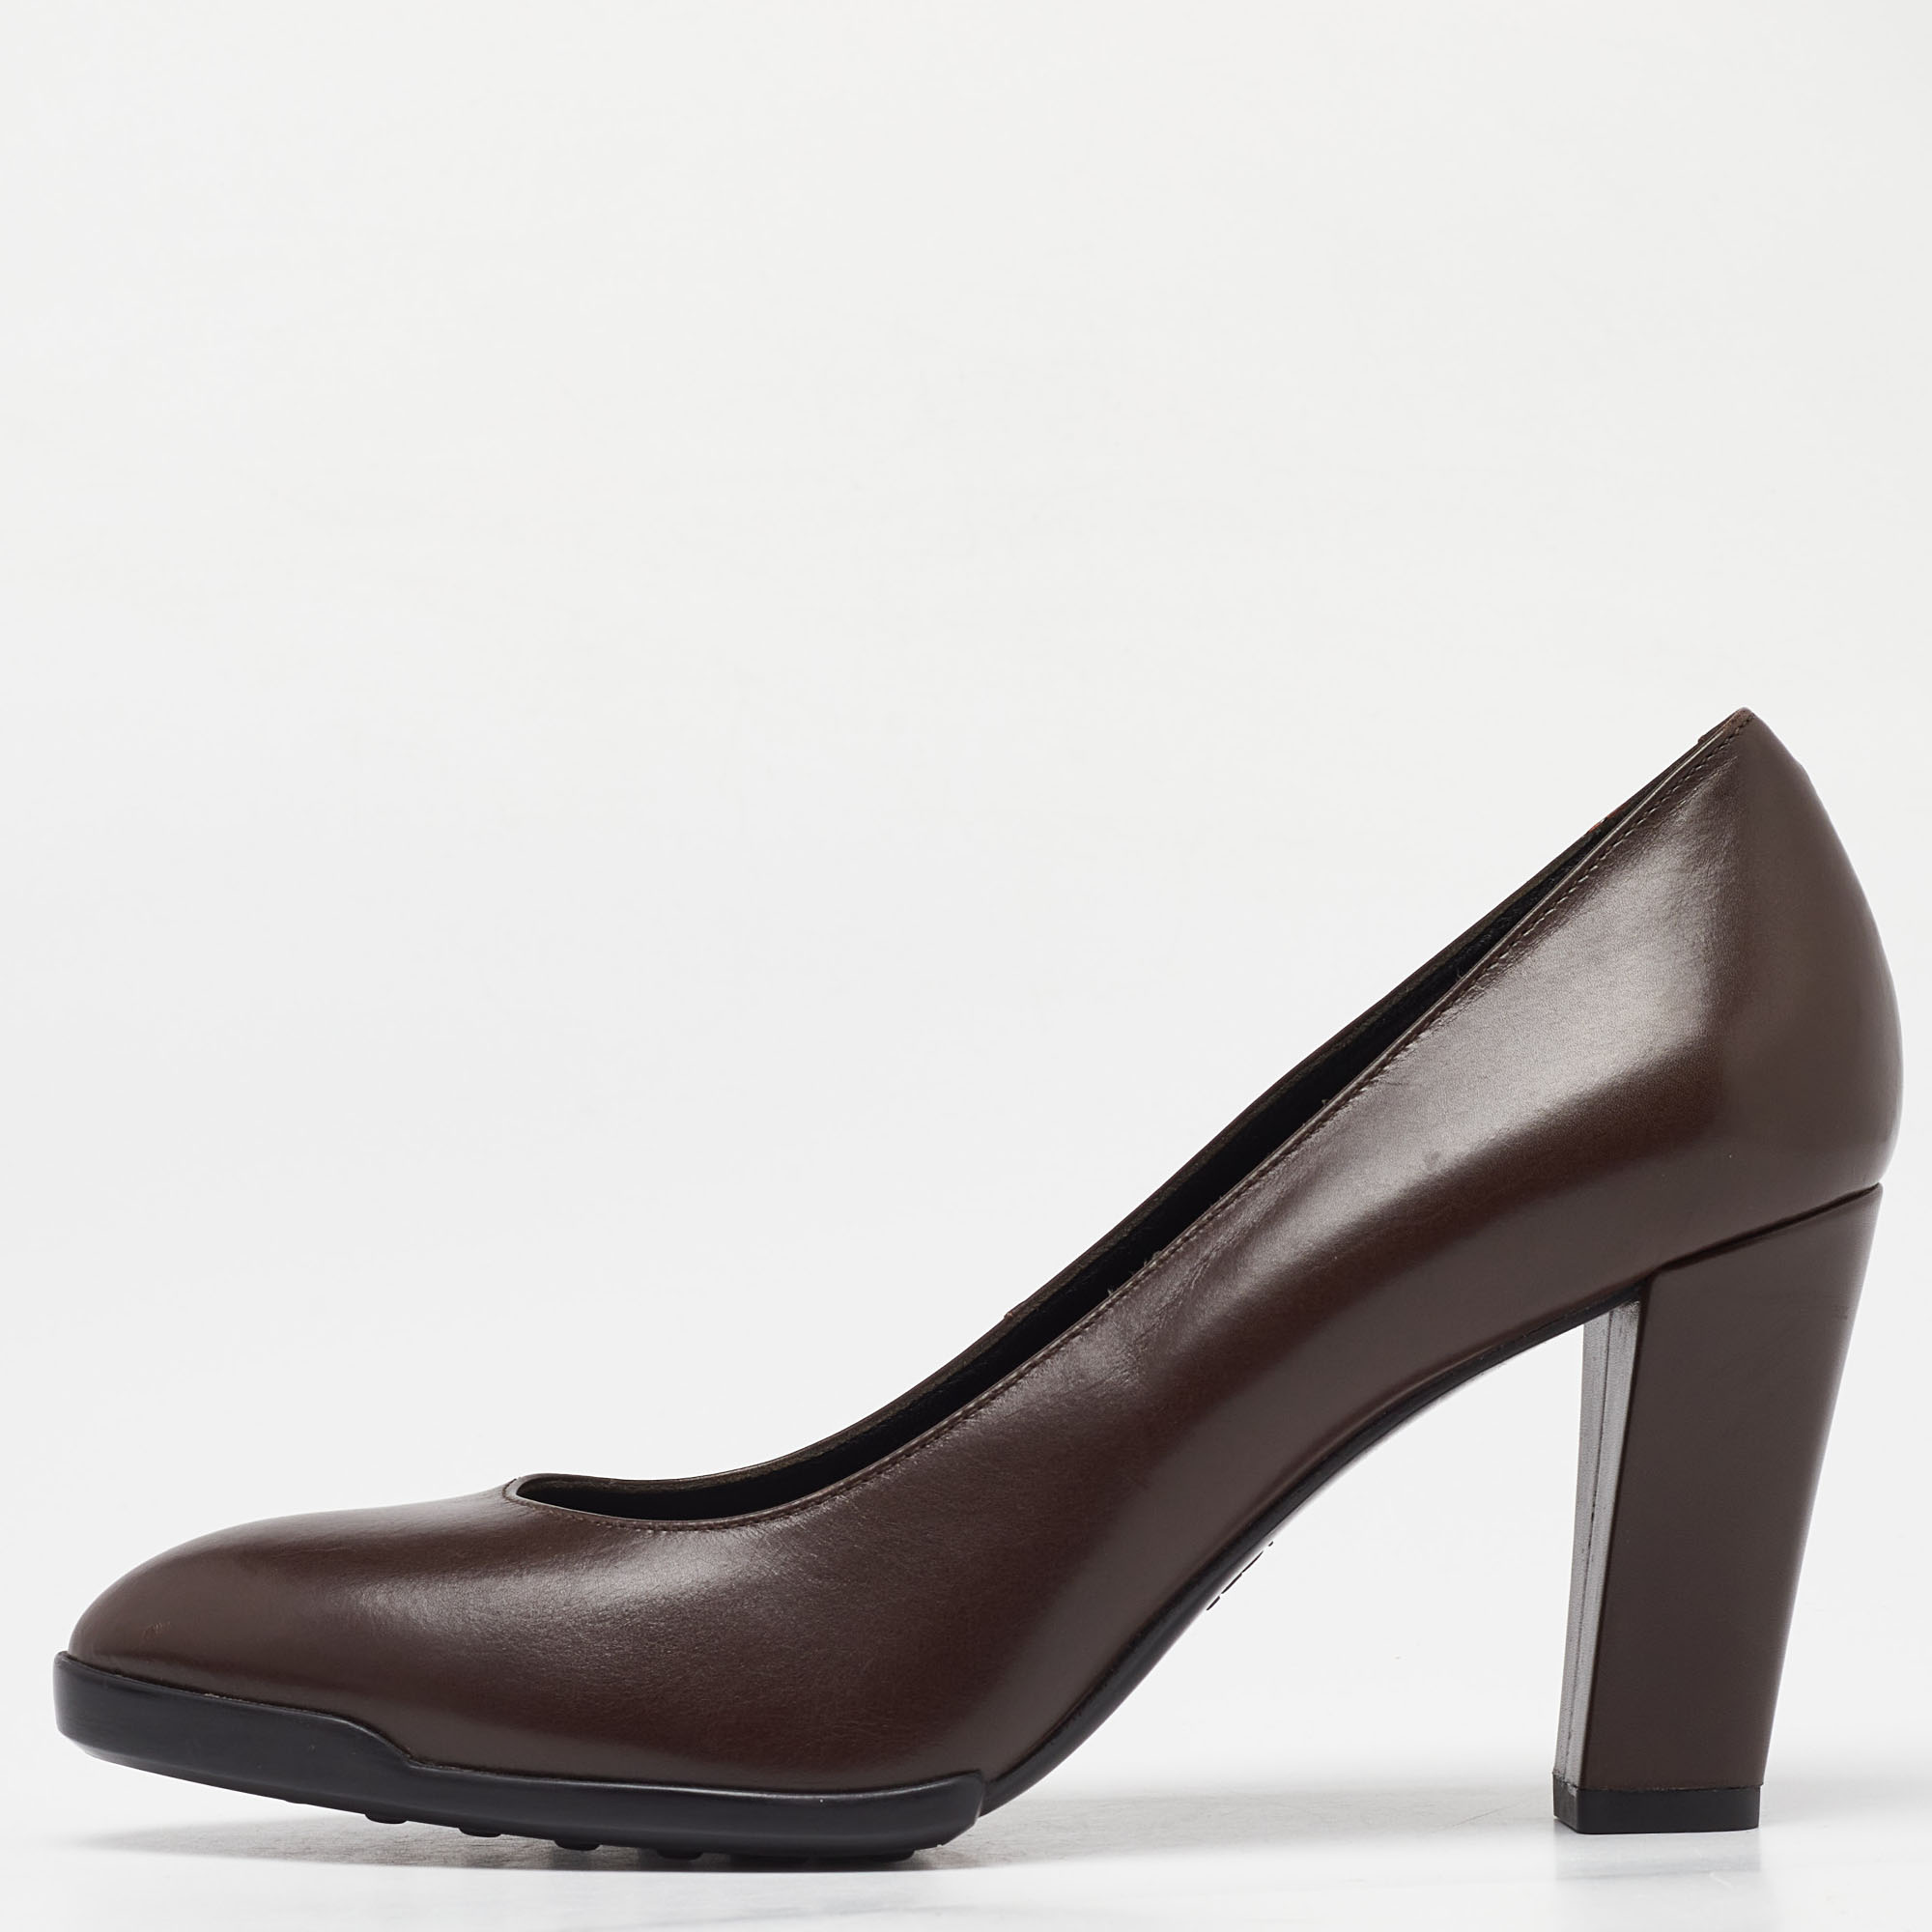 Tod's brown leather block heel pumps size 38